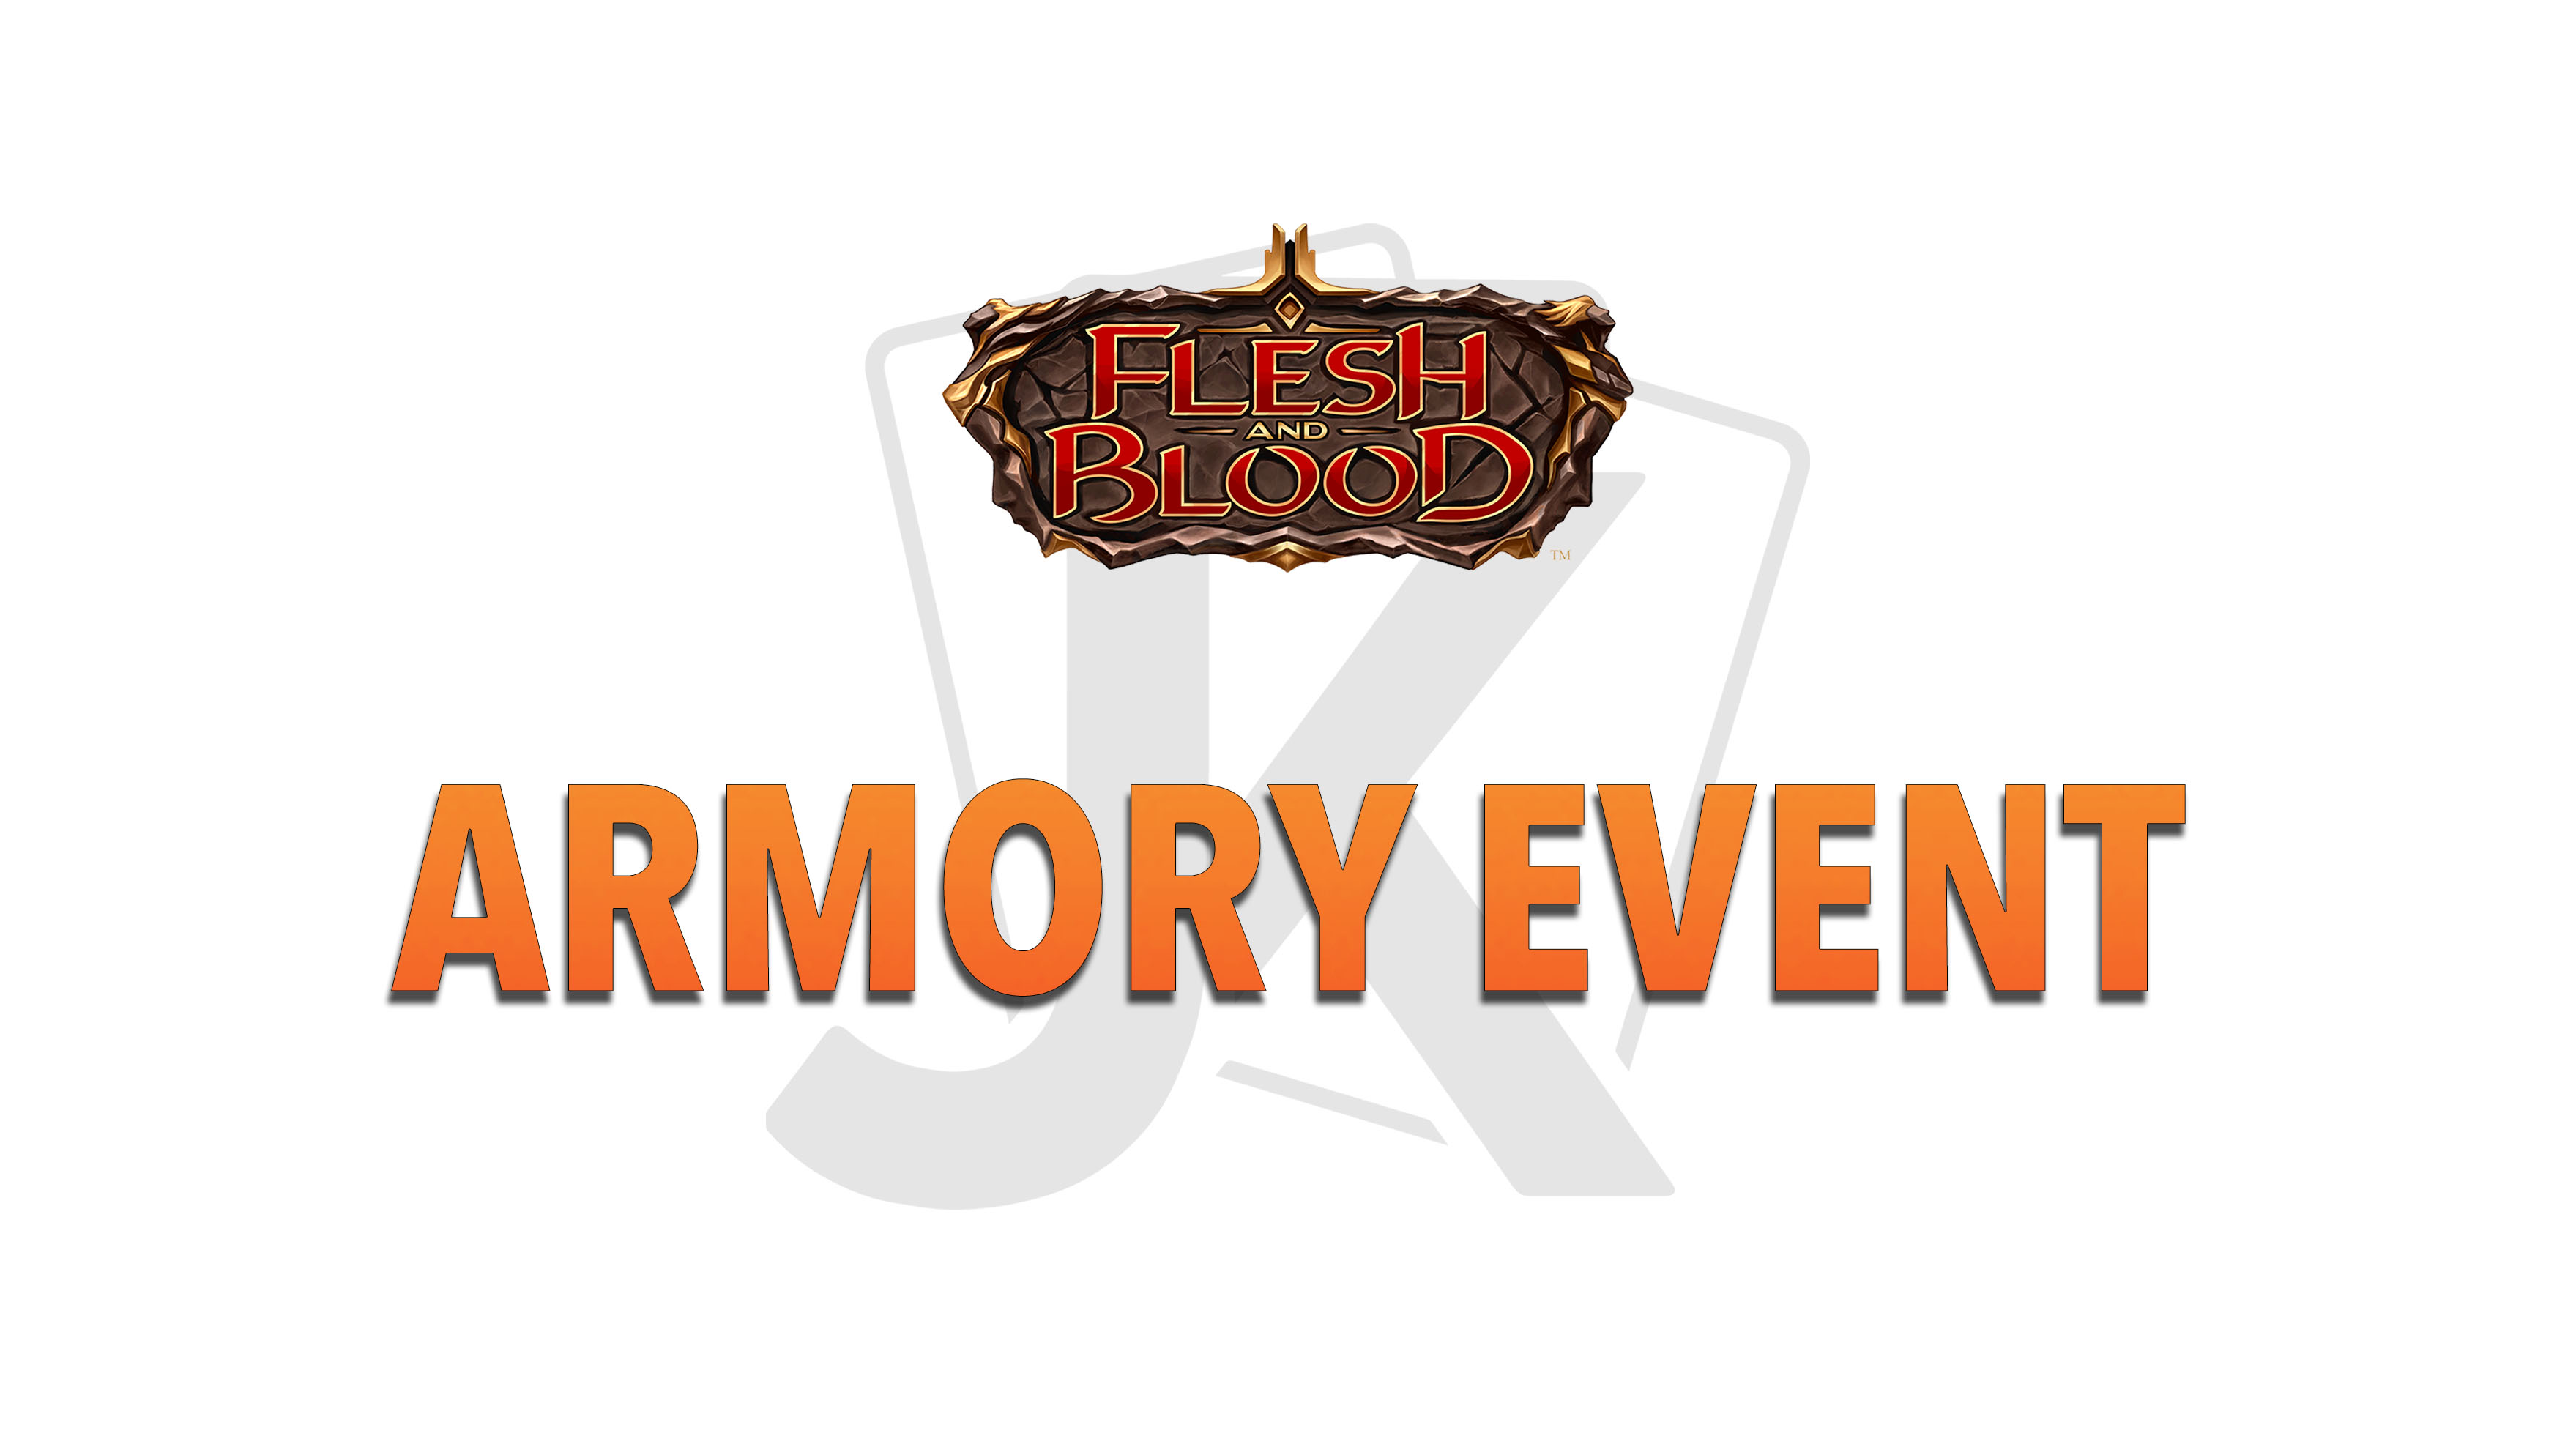 Flesh and Blood Armory Event Darmstadt